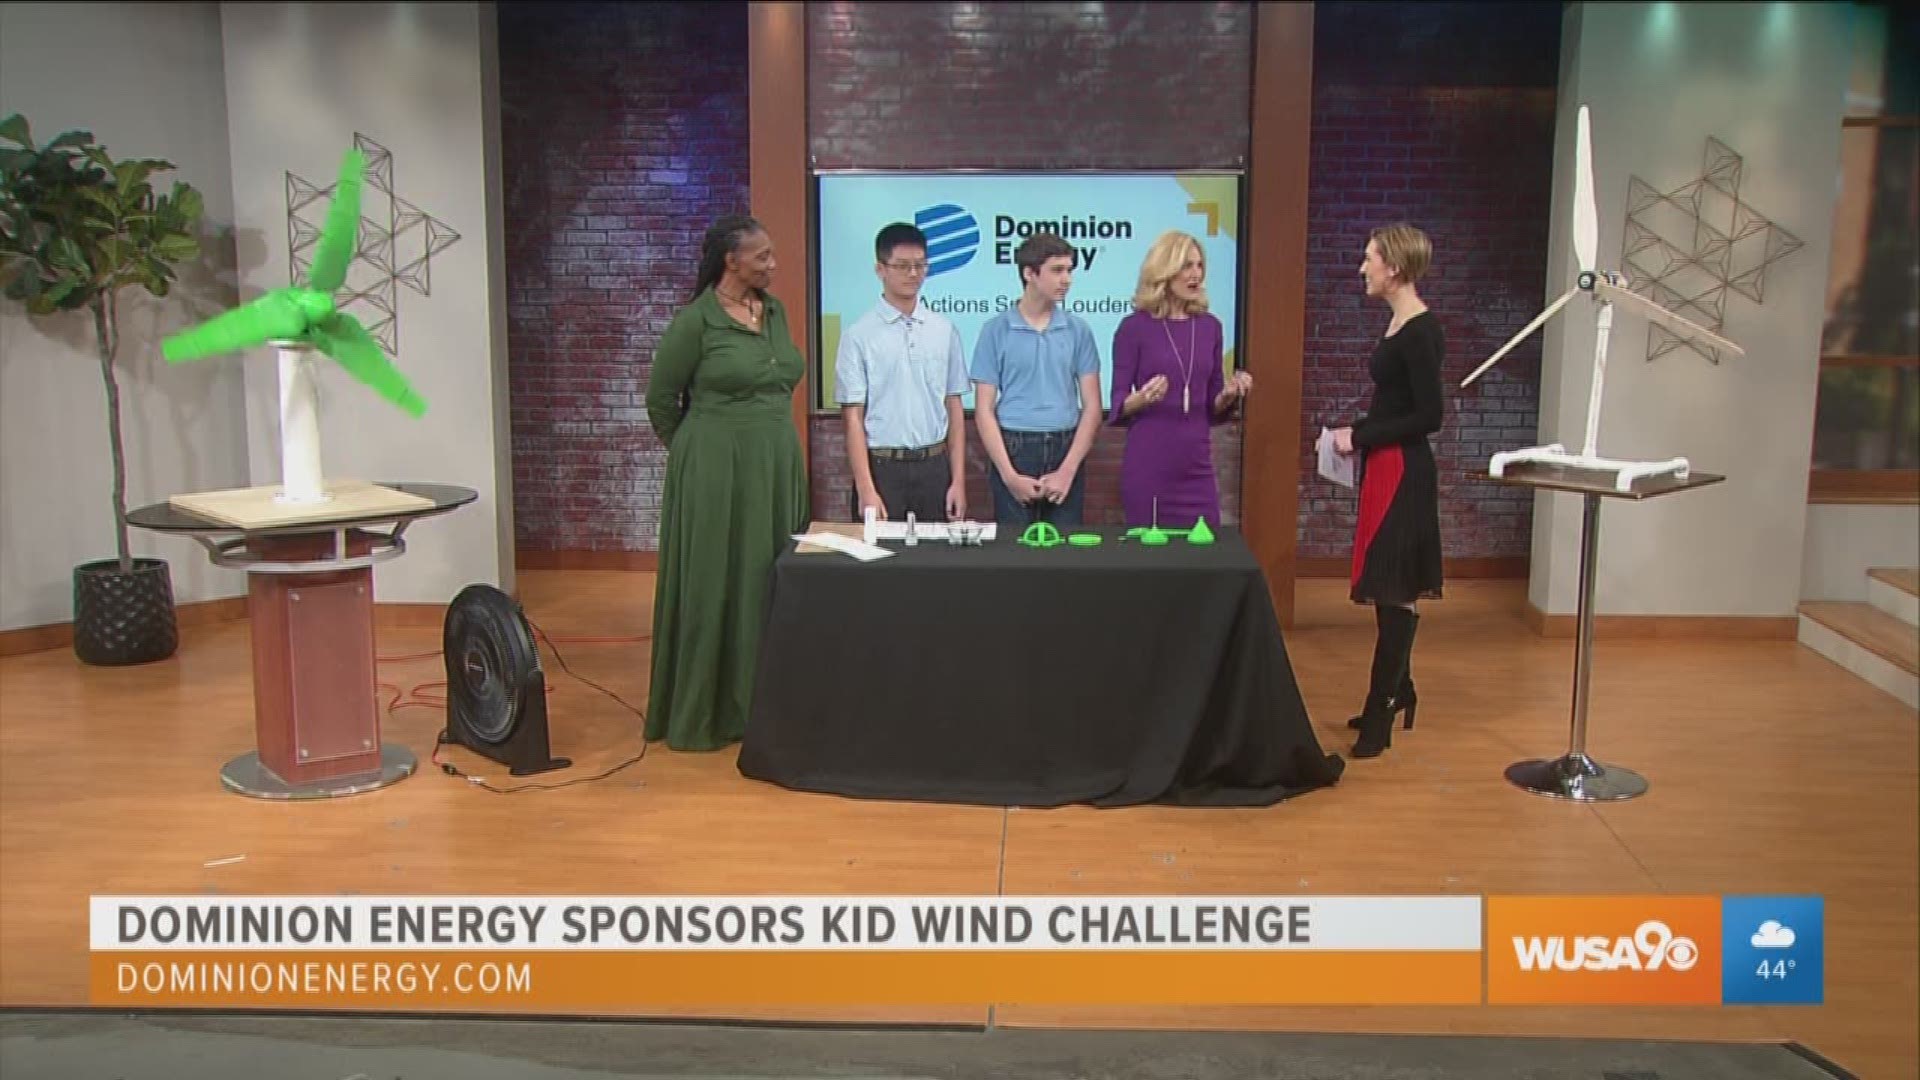 Students from Fairfax County's Glasgow Middle School showcase their winning projects in the KidWind Challenge. Segment sponsored by Dominion Energy.